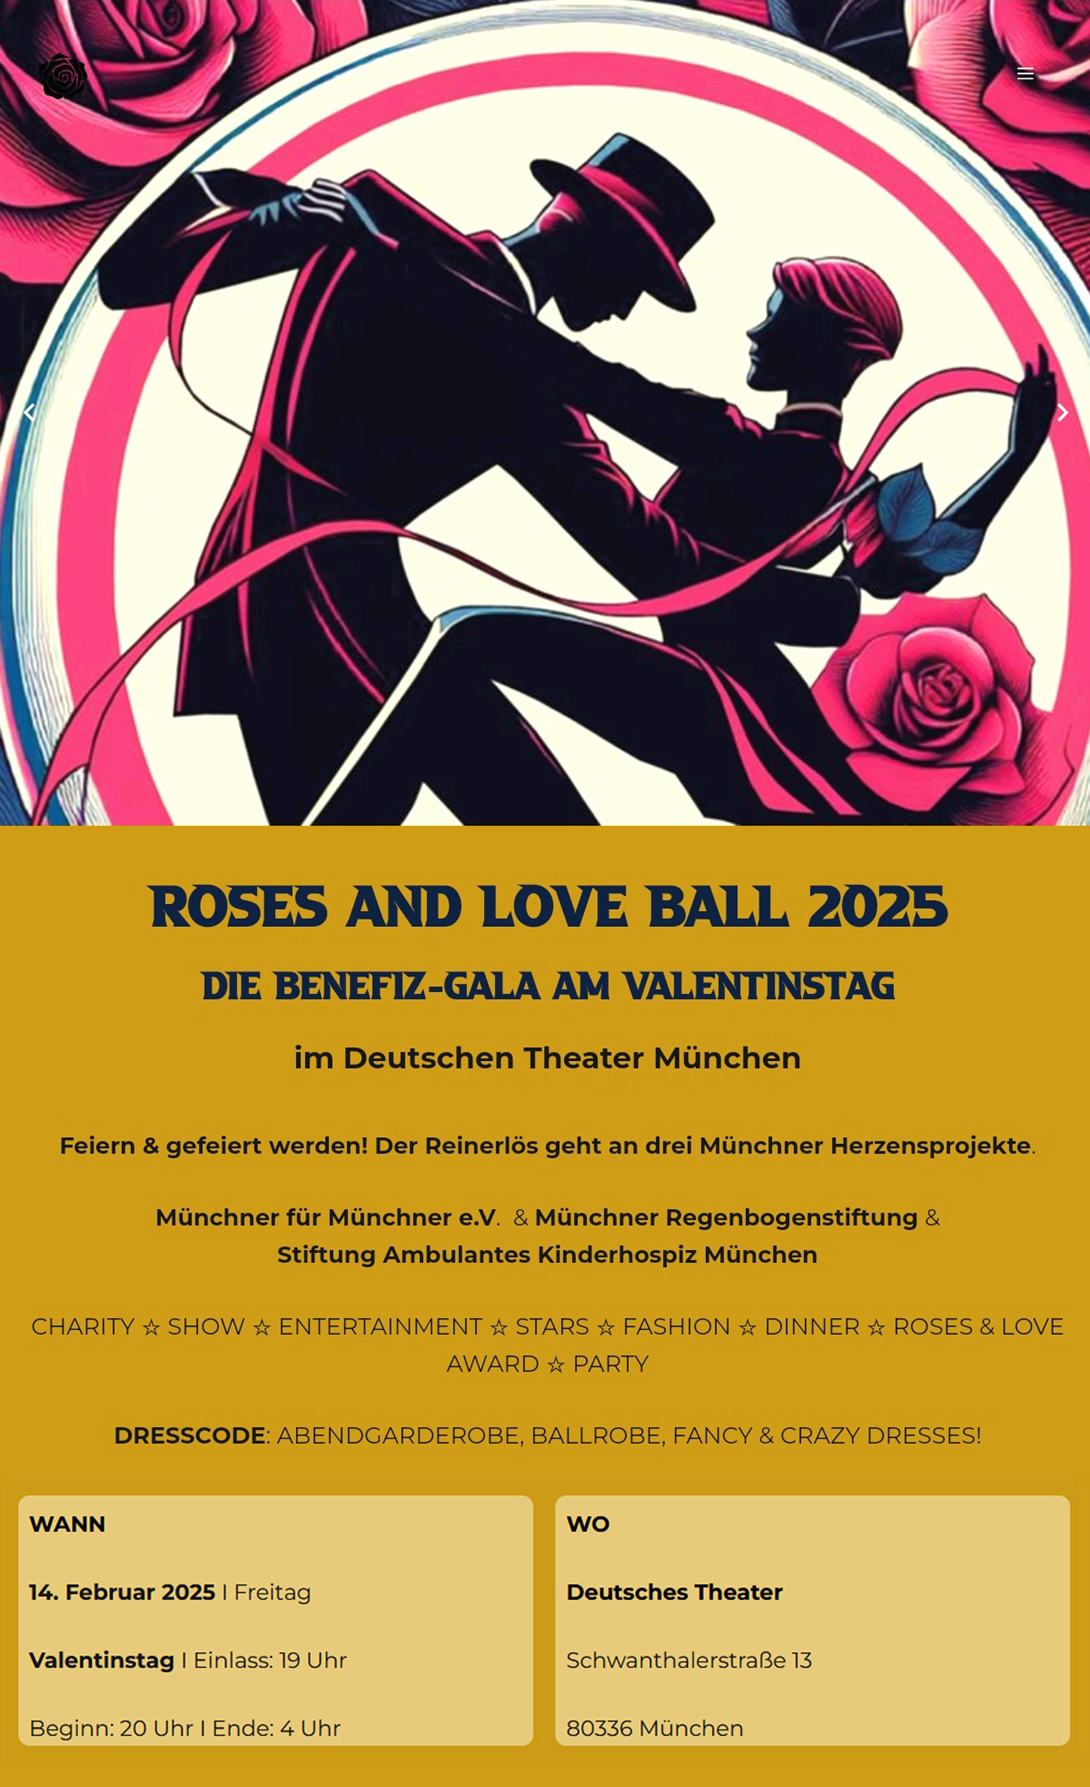 ROSES AND LOVE BALL 2025 - Flyer